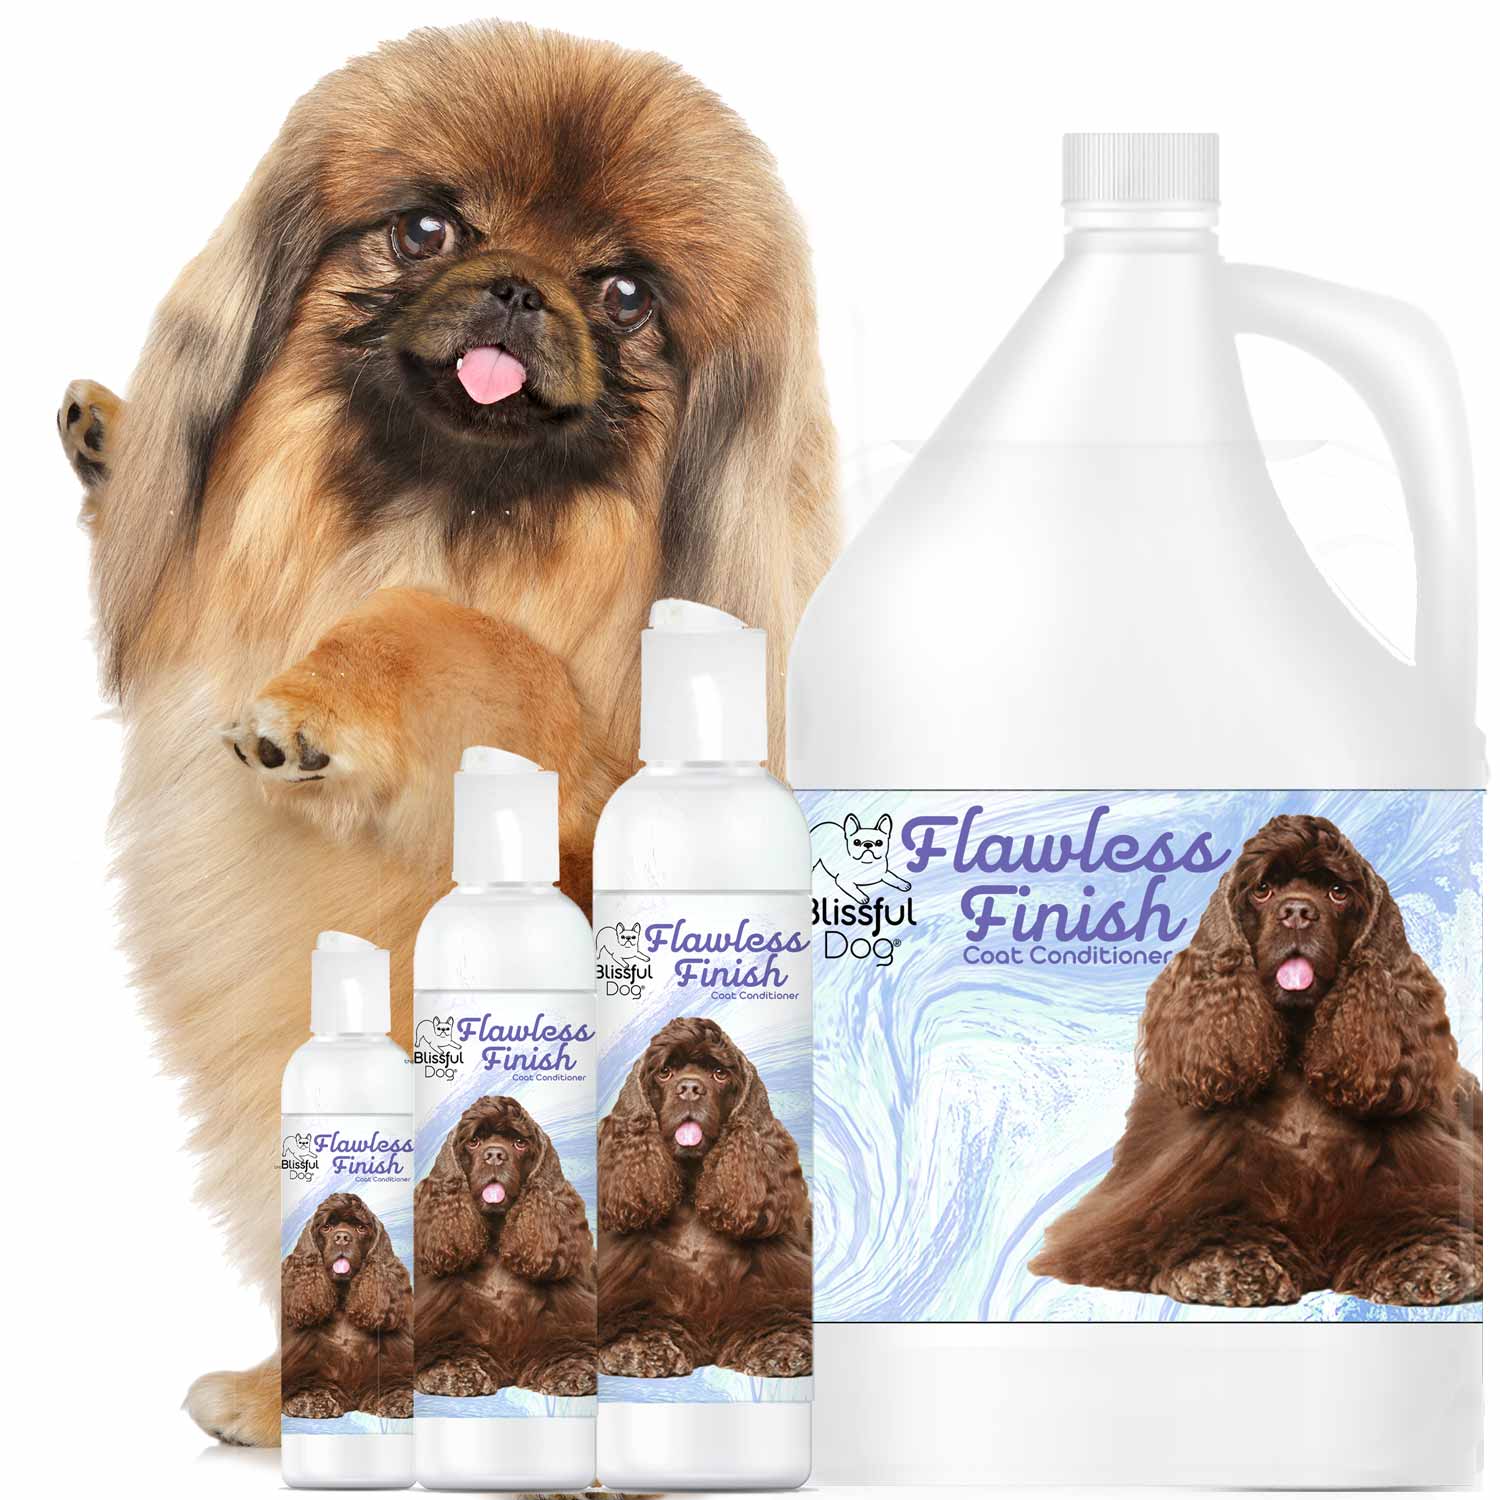 The Blissful Dog Flawless Finish Dog Coat Conditioner A+ Performance